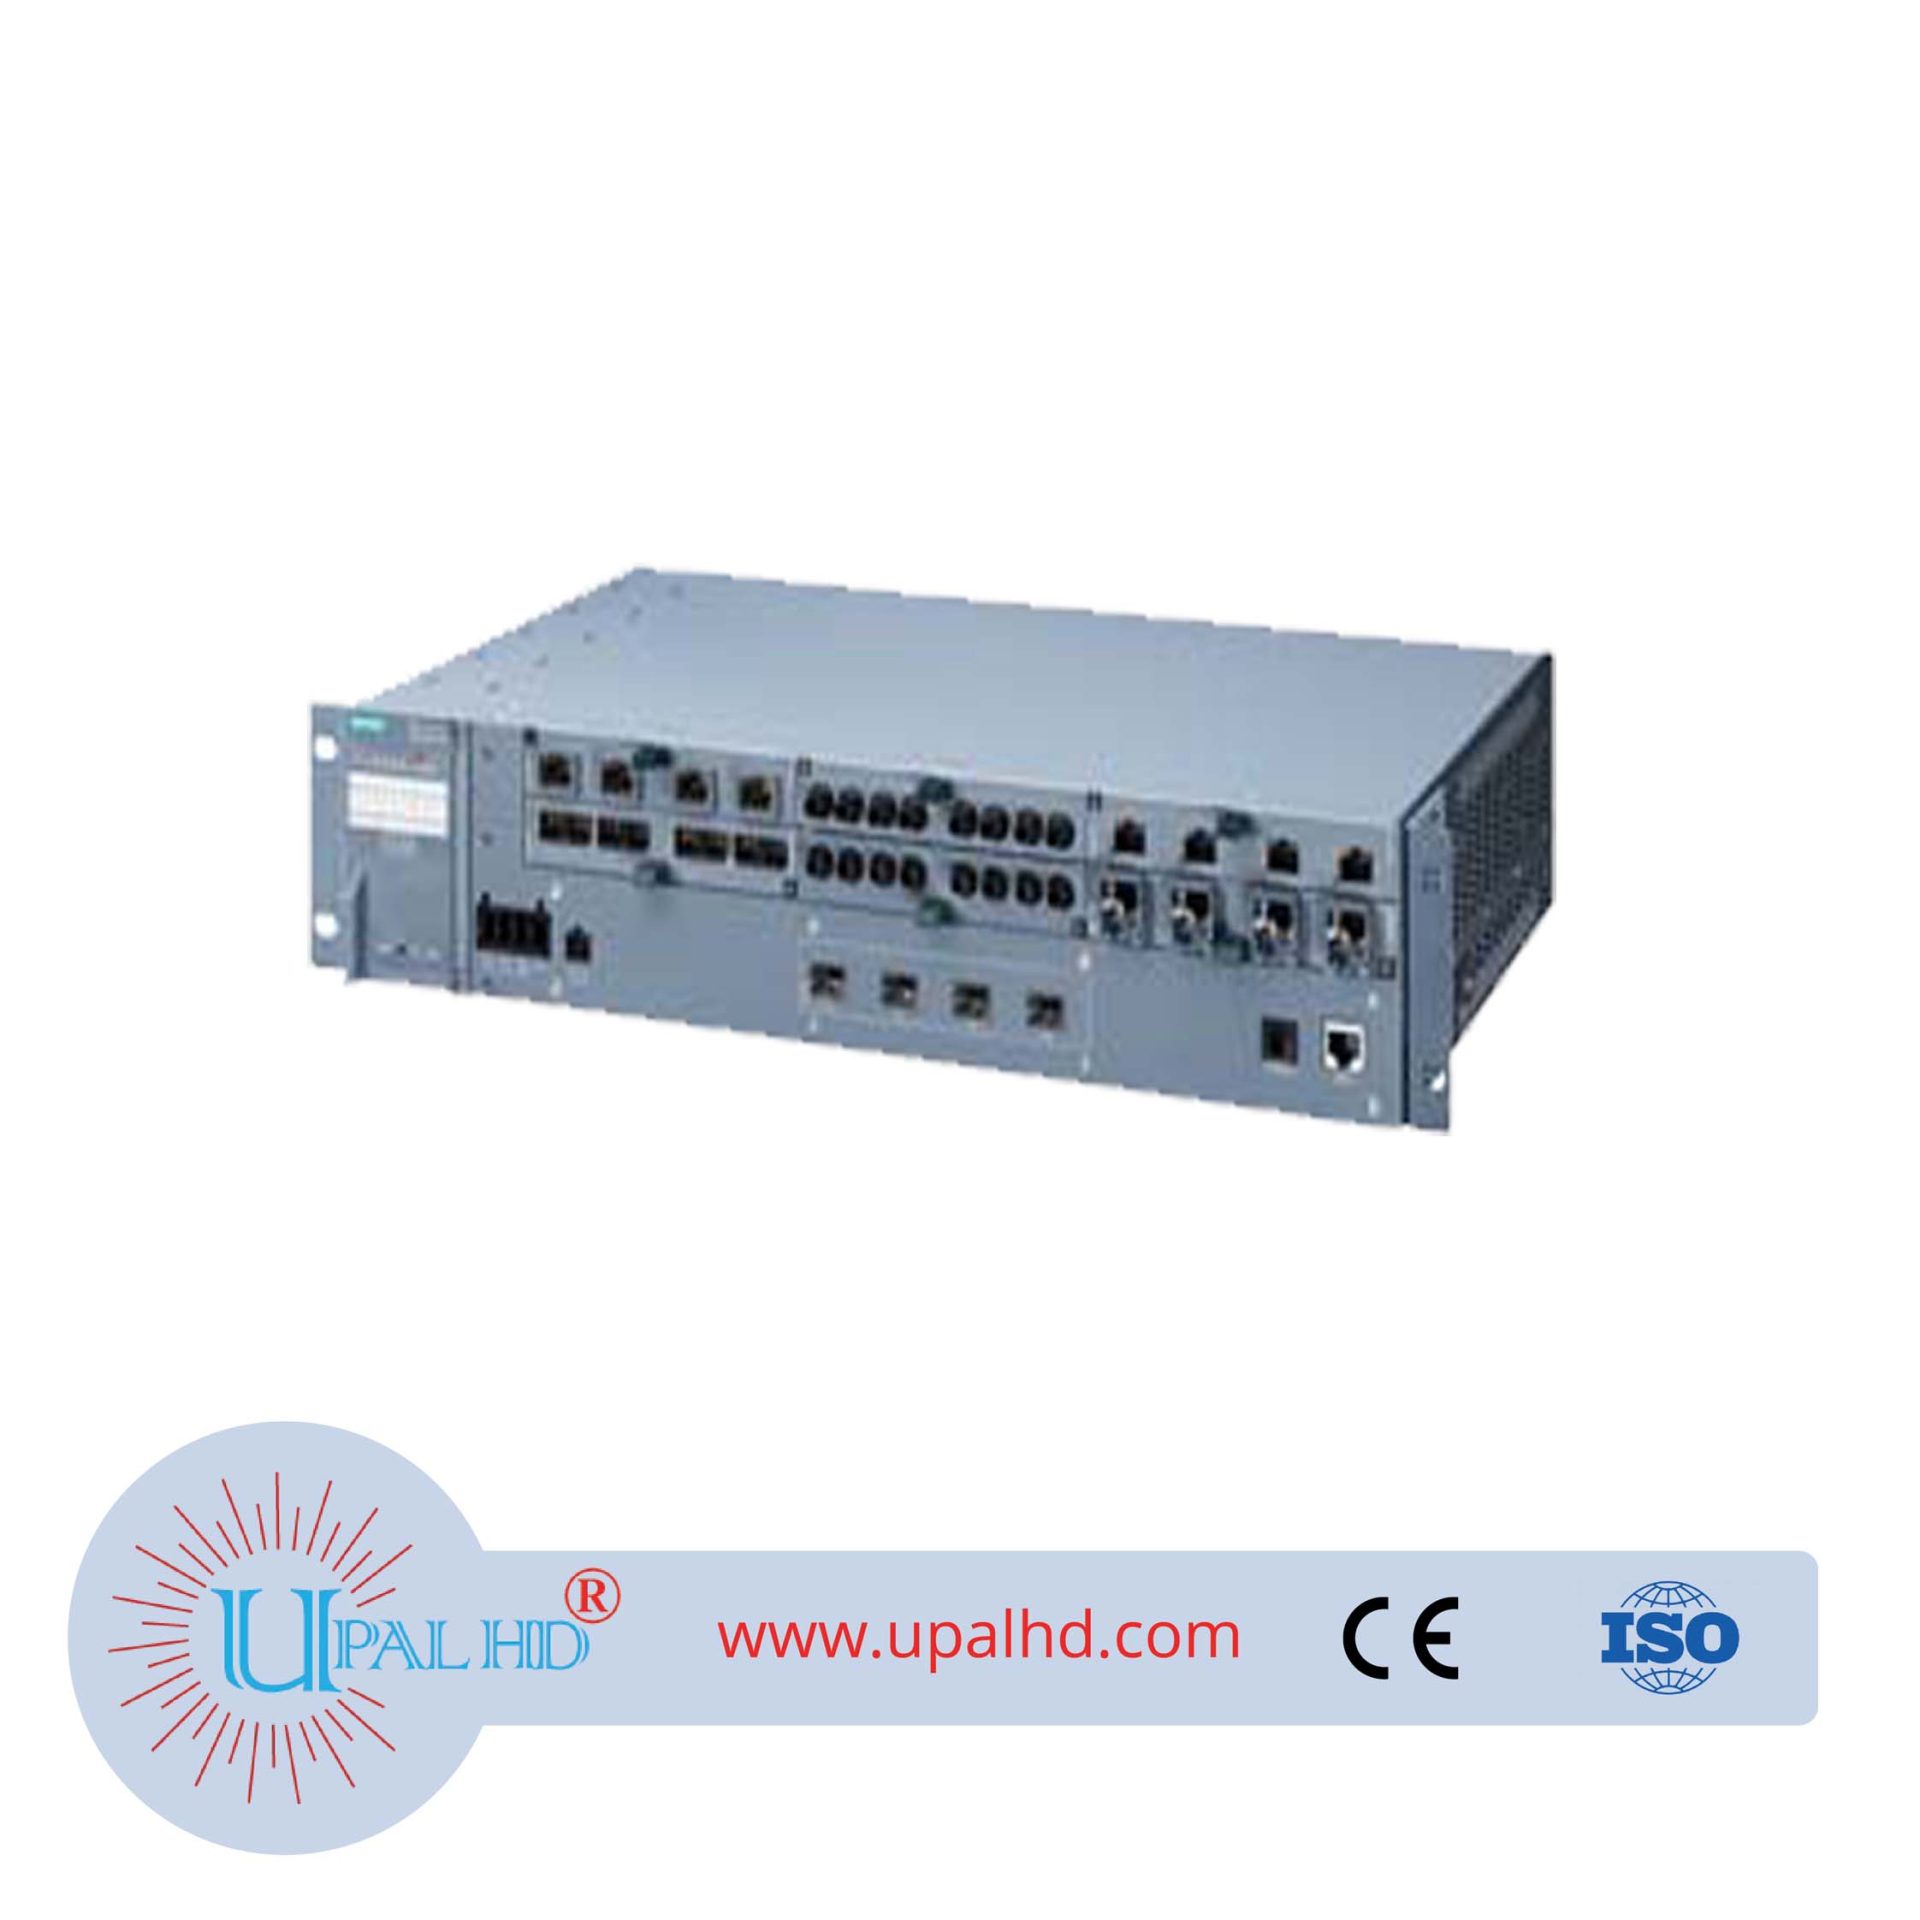 SCALANCE XR528-6M managed layer 3 switch, 4xSFP+, 6x for Medienm odule, PoE, front port.